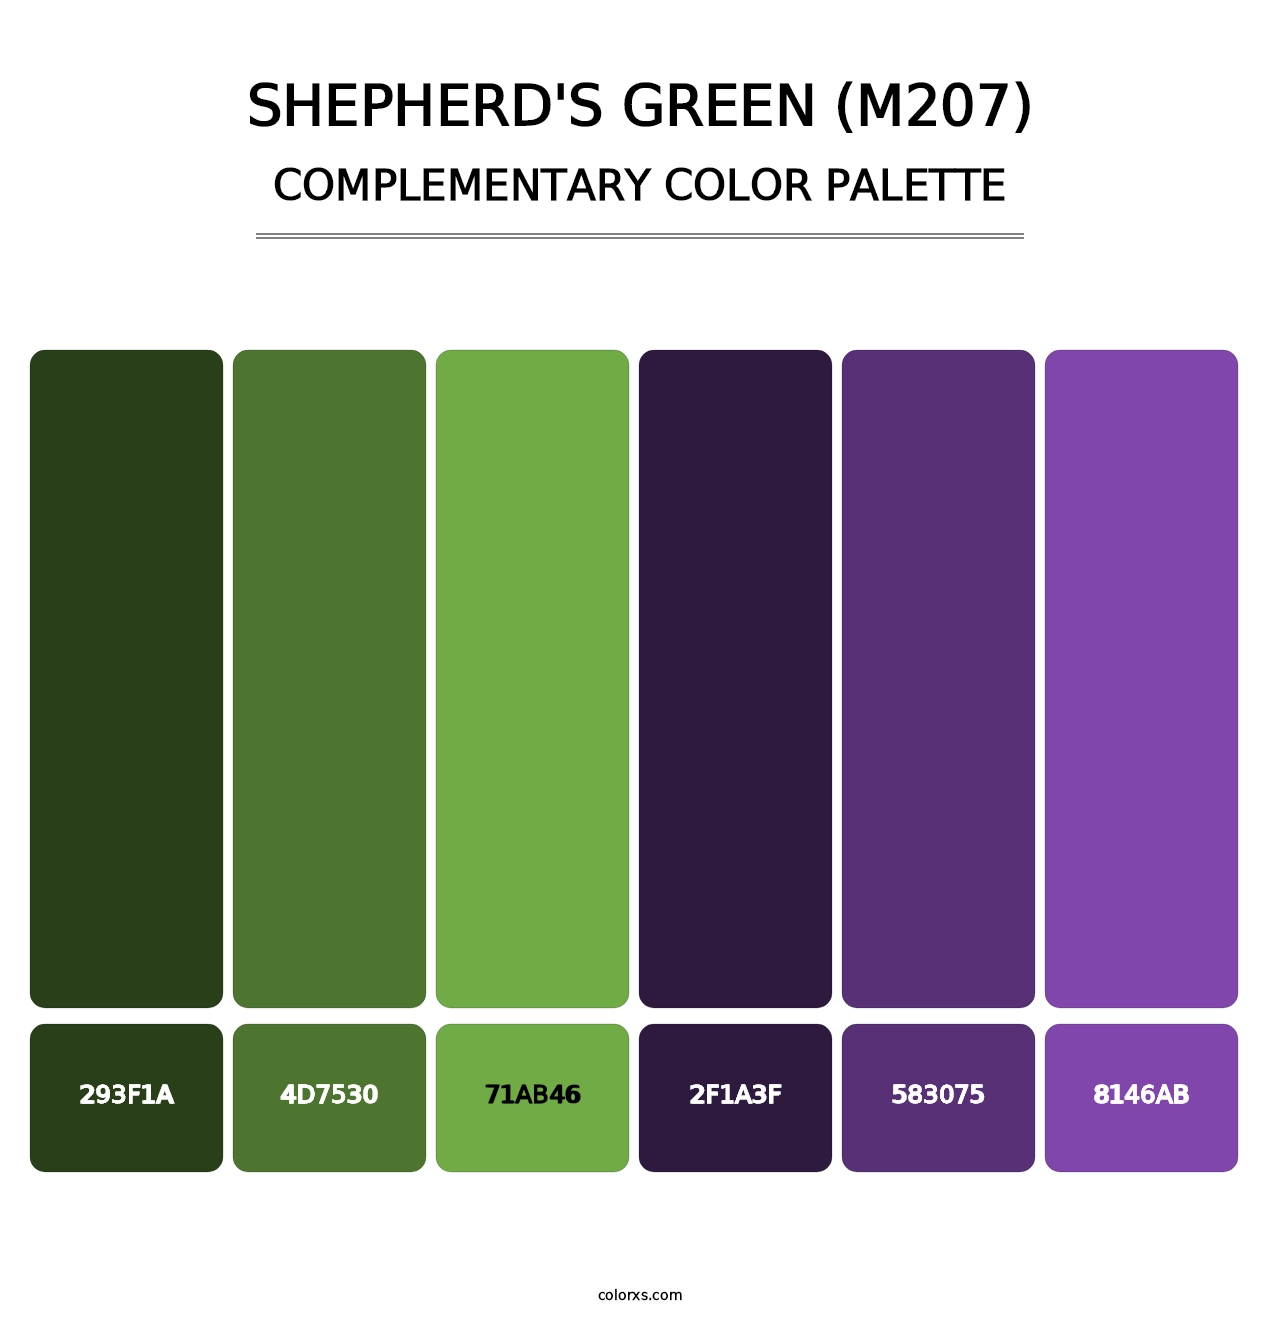 Shepherd's Green (M207) - Complementary Color Palette